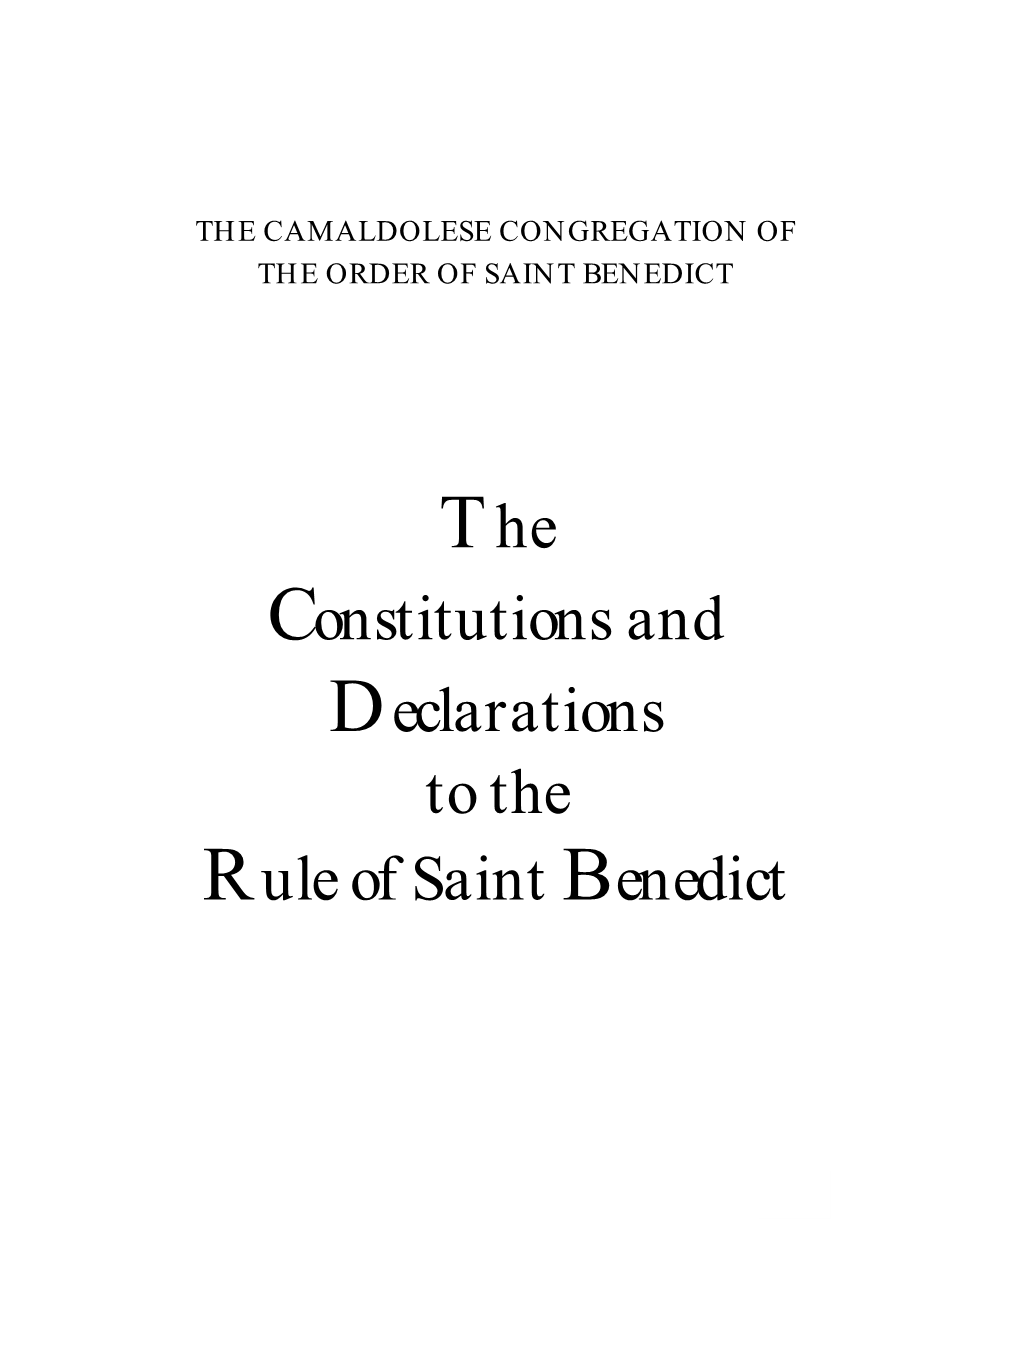 The Constitutions and Declarations to the Rule of Saint Benedict